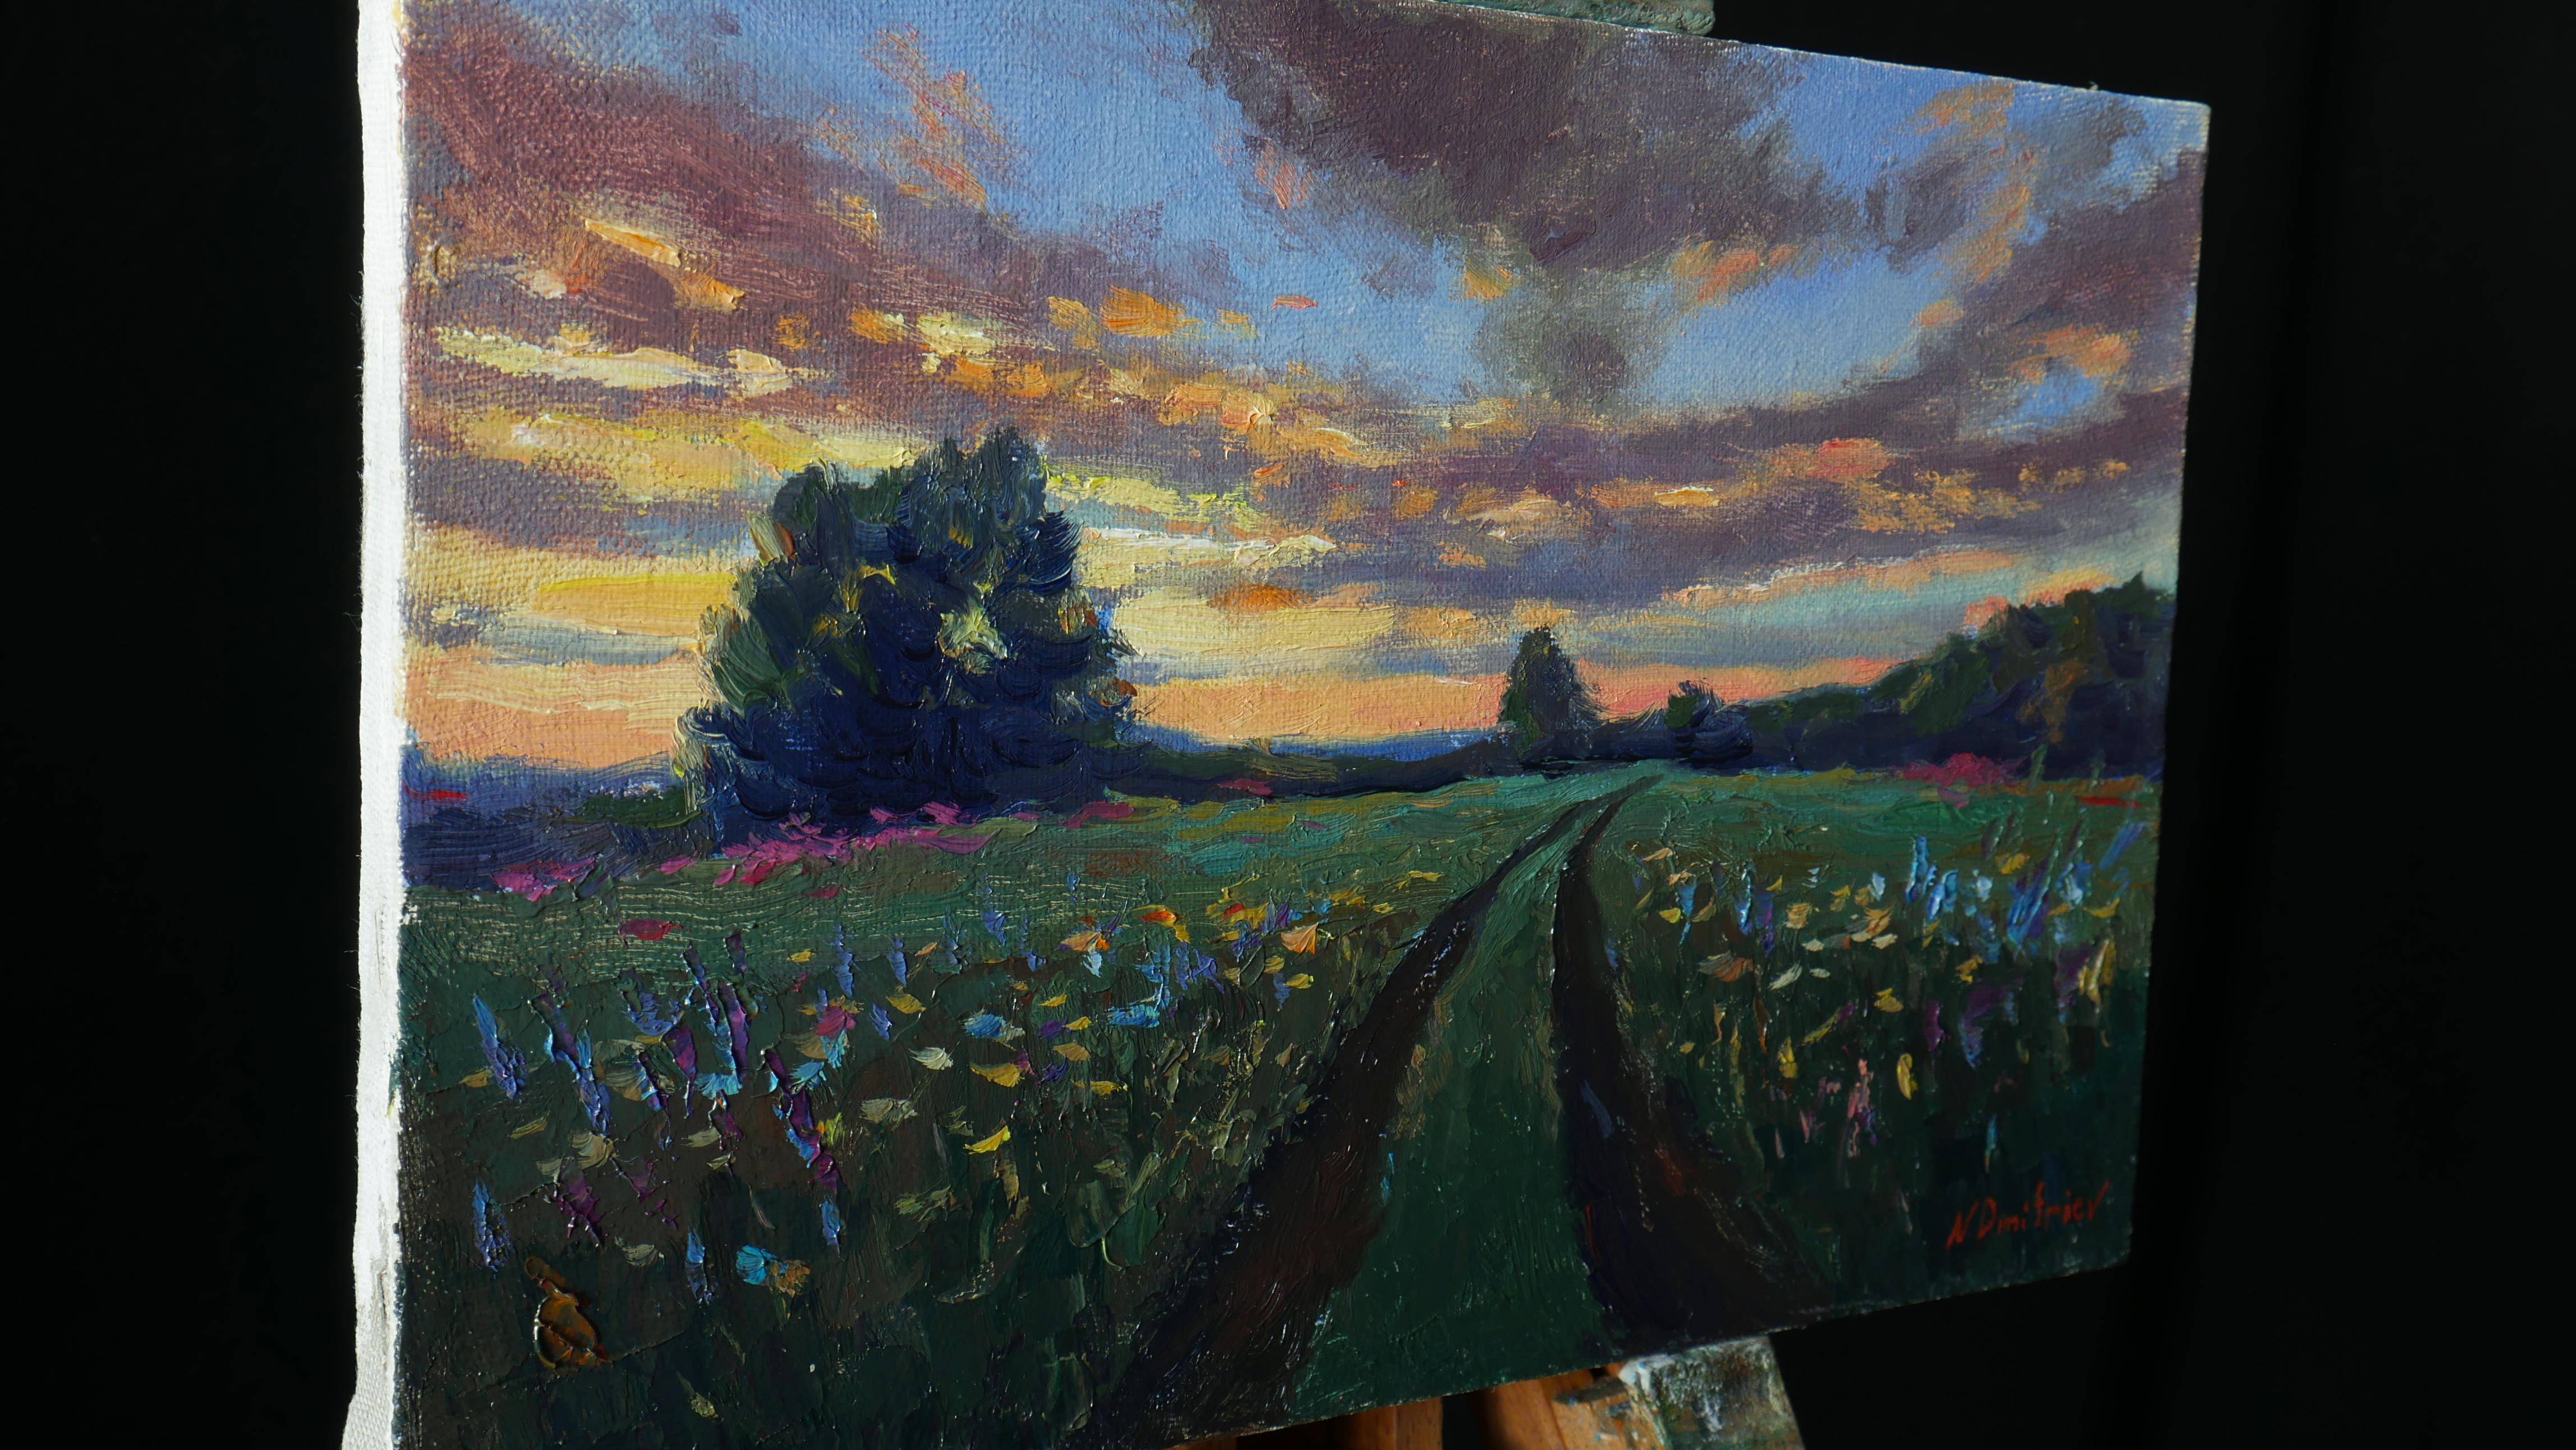 Sunset Over Wildflowers Field - summer landscape painting - Impressionist Painting by Nikolay Dmitriev